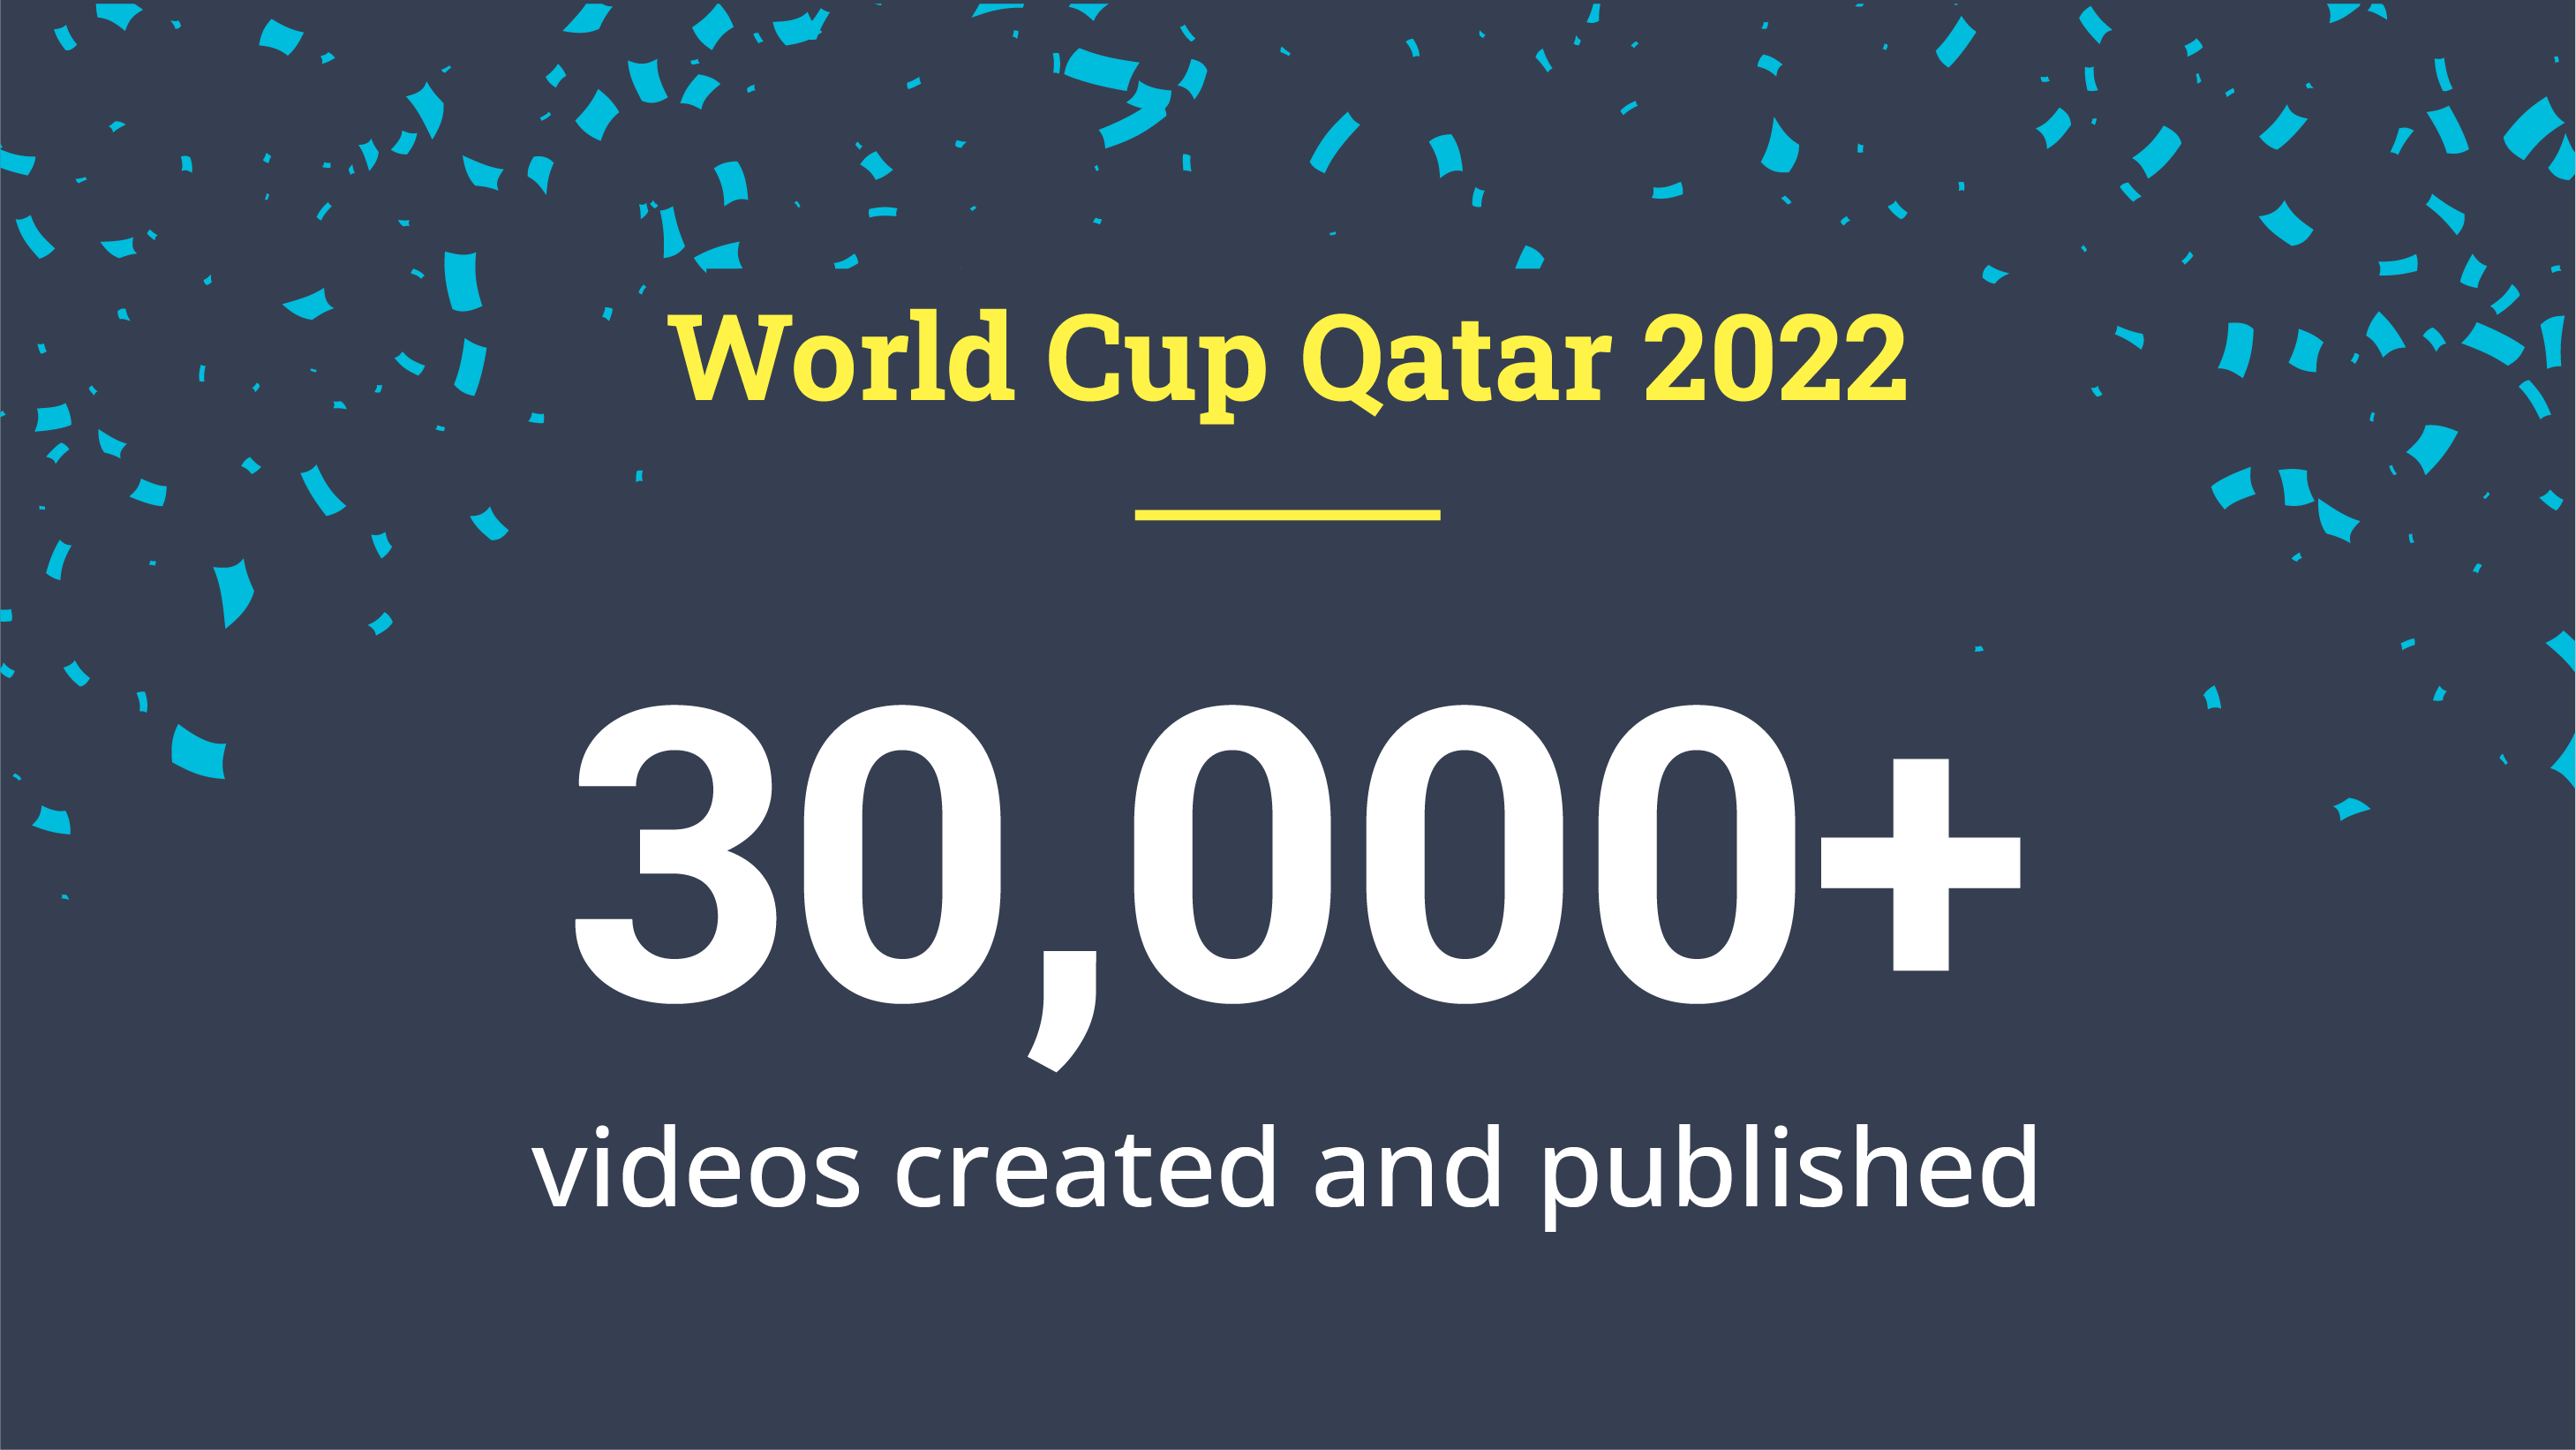 Infographic displaying number of highlights posted during 2022 World Cup in Qatar.